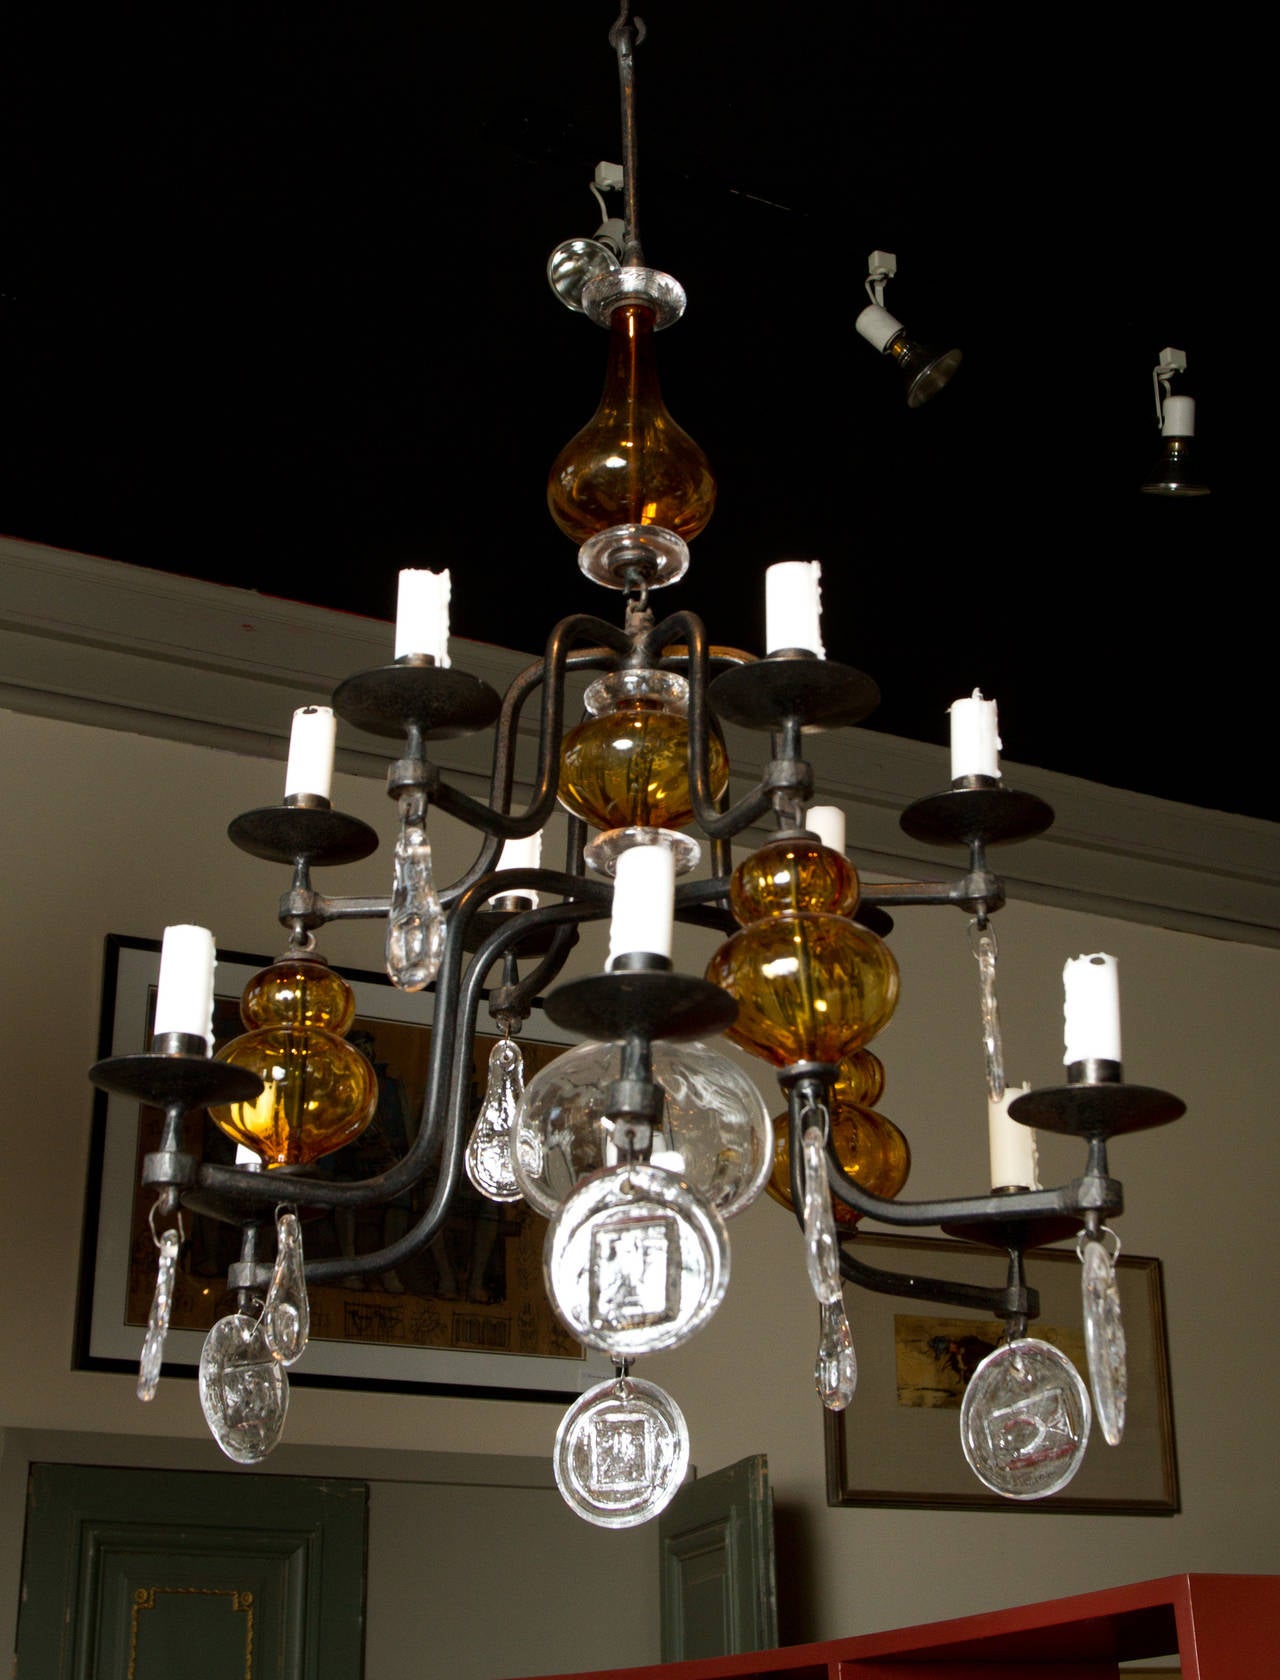 Rare wrought iron, clear and amber glass ten light chandelier by Erik Hoglund for Kosta Boda featuring typical beautifully moulded glass pendants.